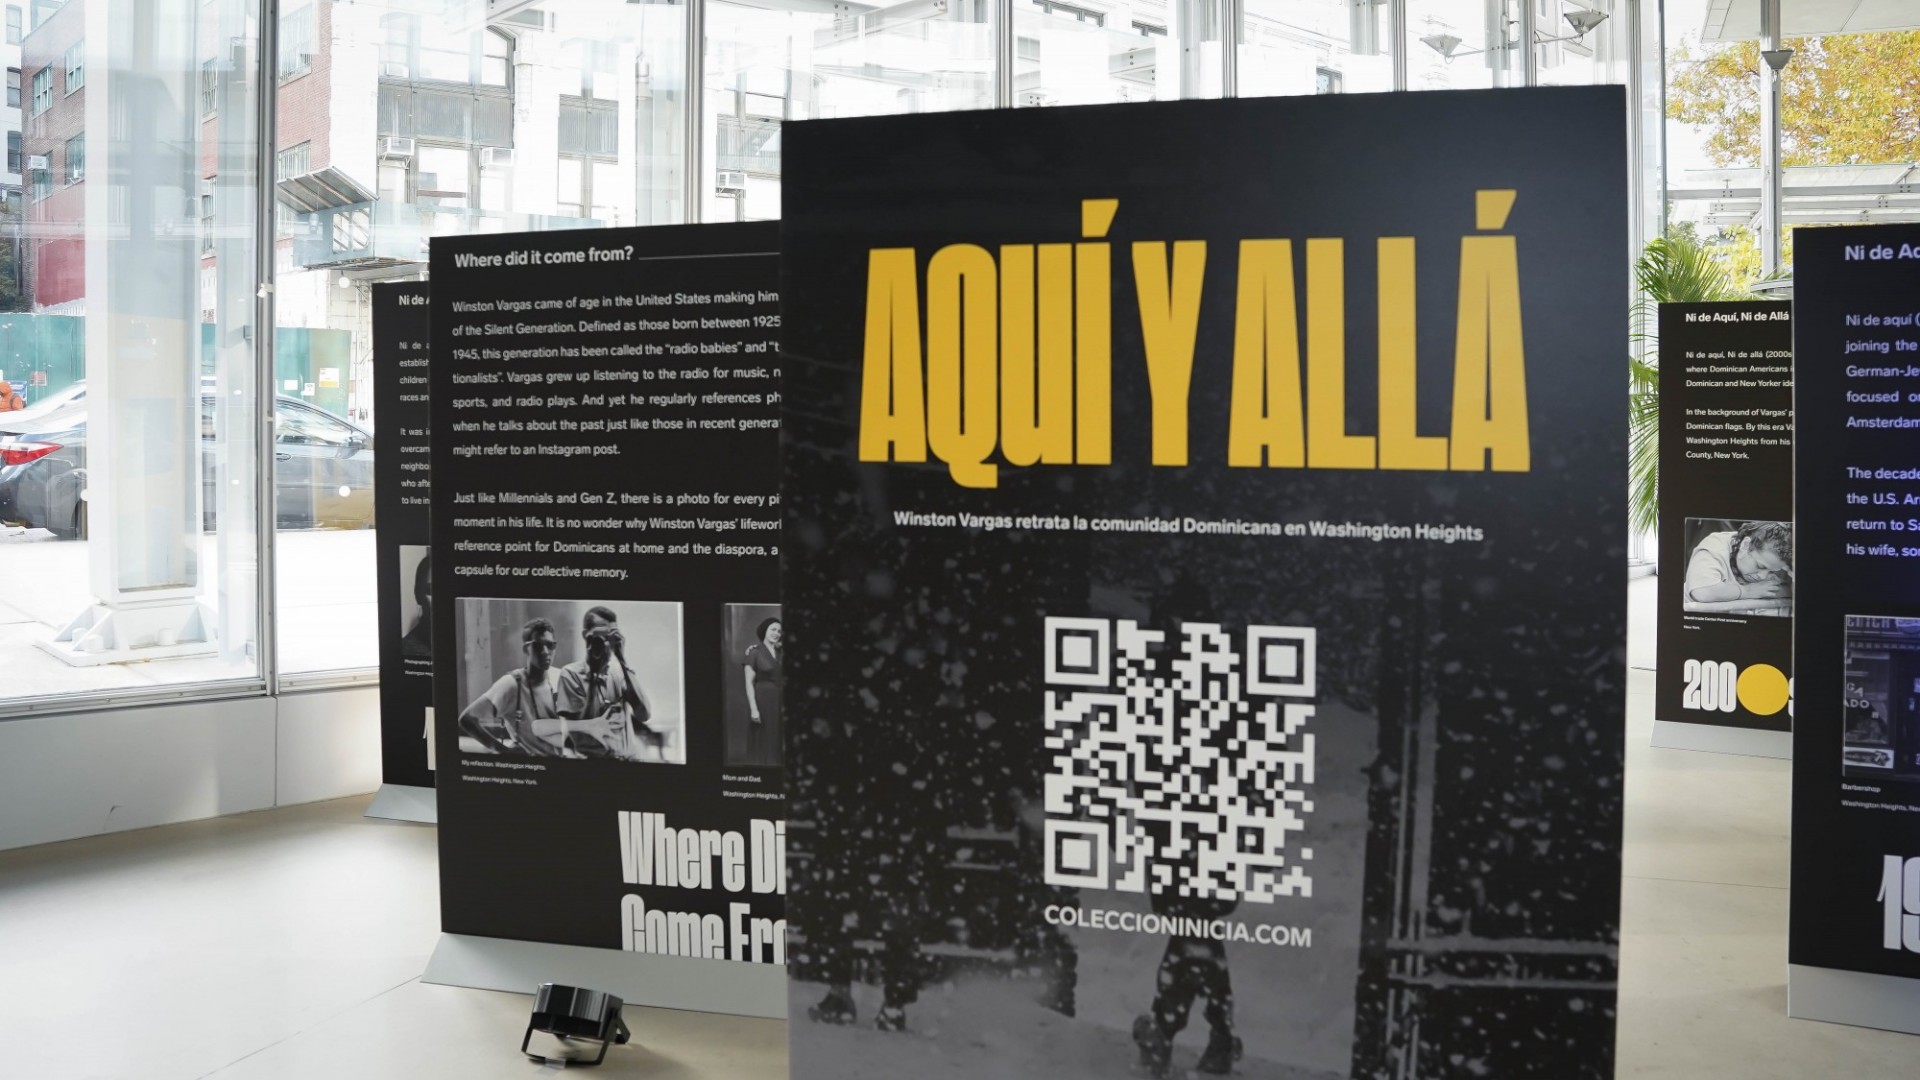 Large black foam-core boards displayed in The Forum's windowed Atrium as part of the Aqui y Alla exhibit. The boards feature photos and text.